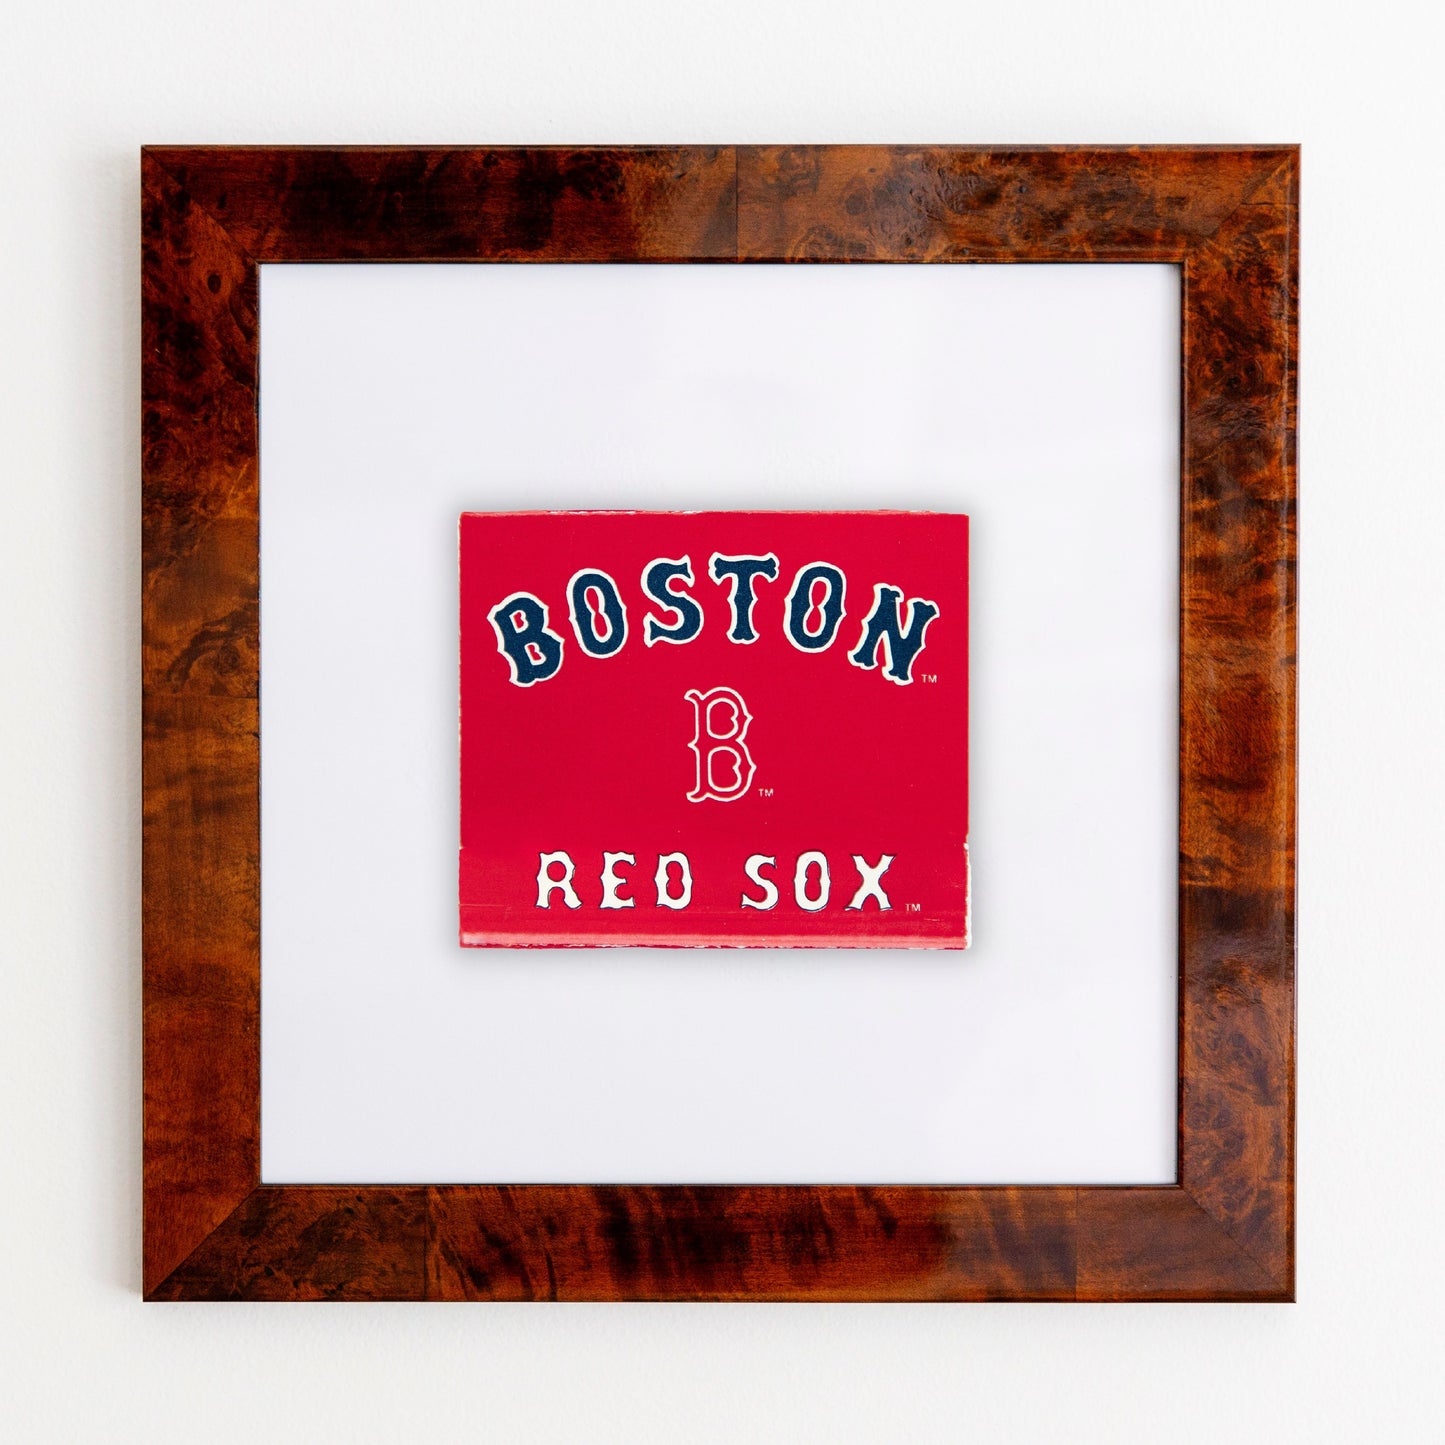 Boston Red Sox (front)